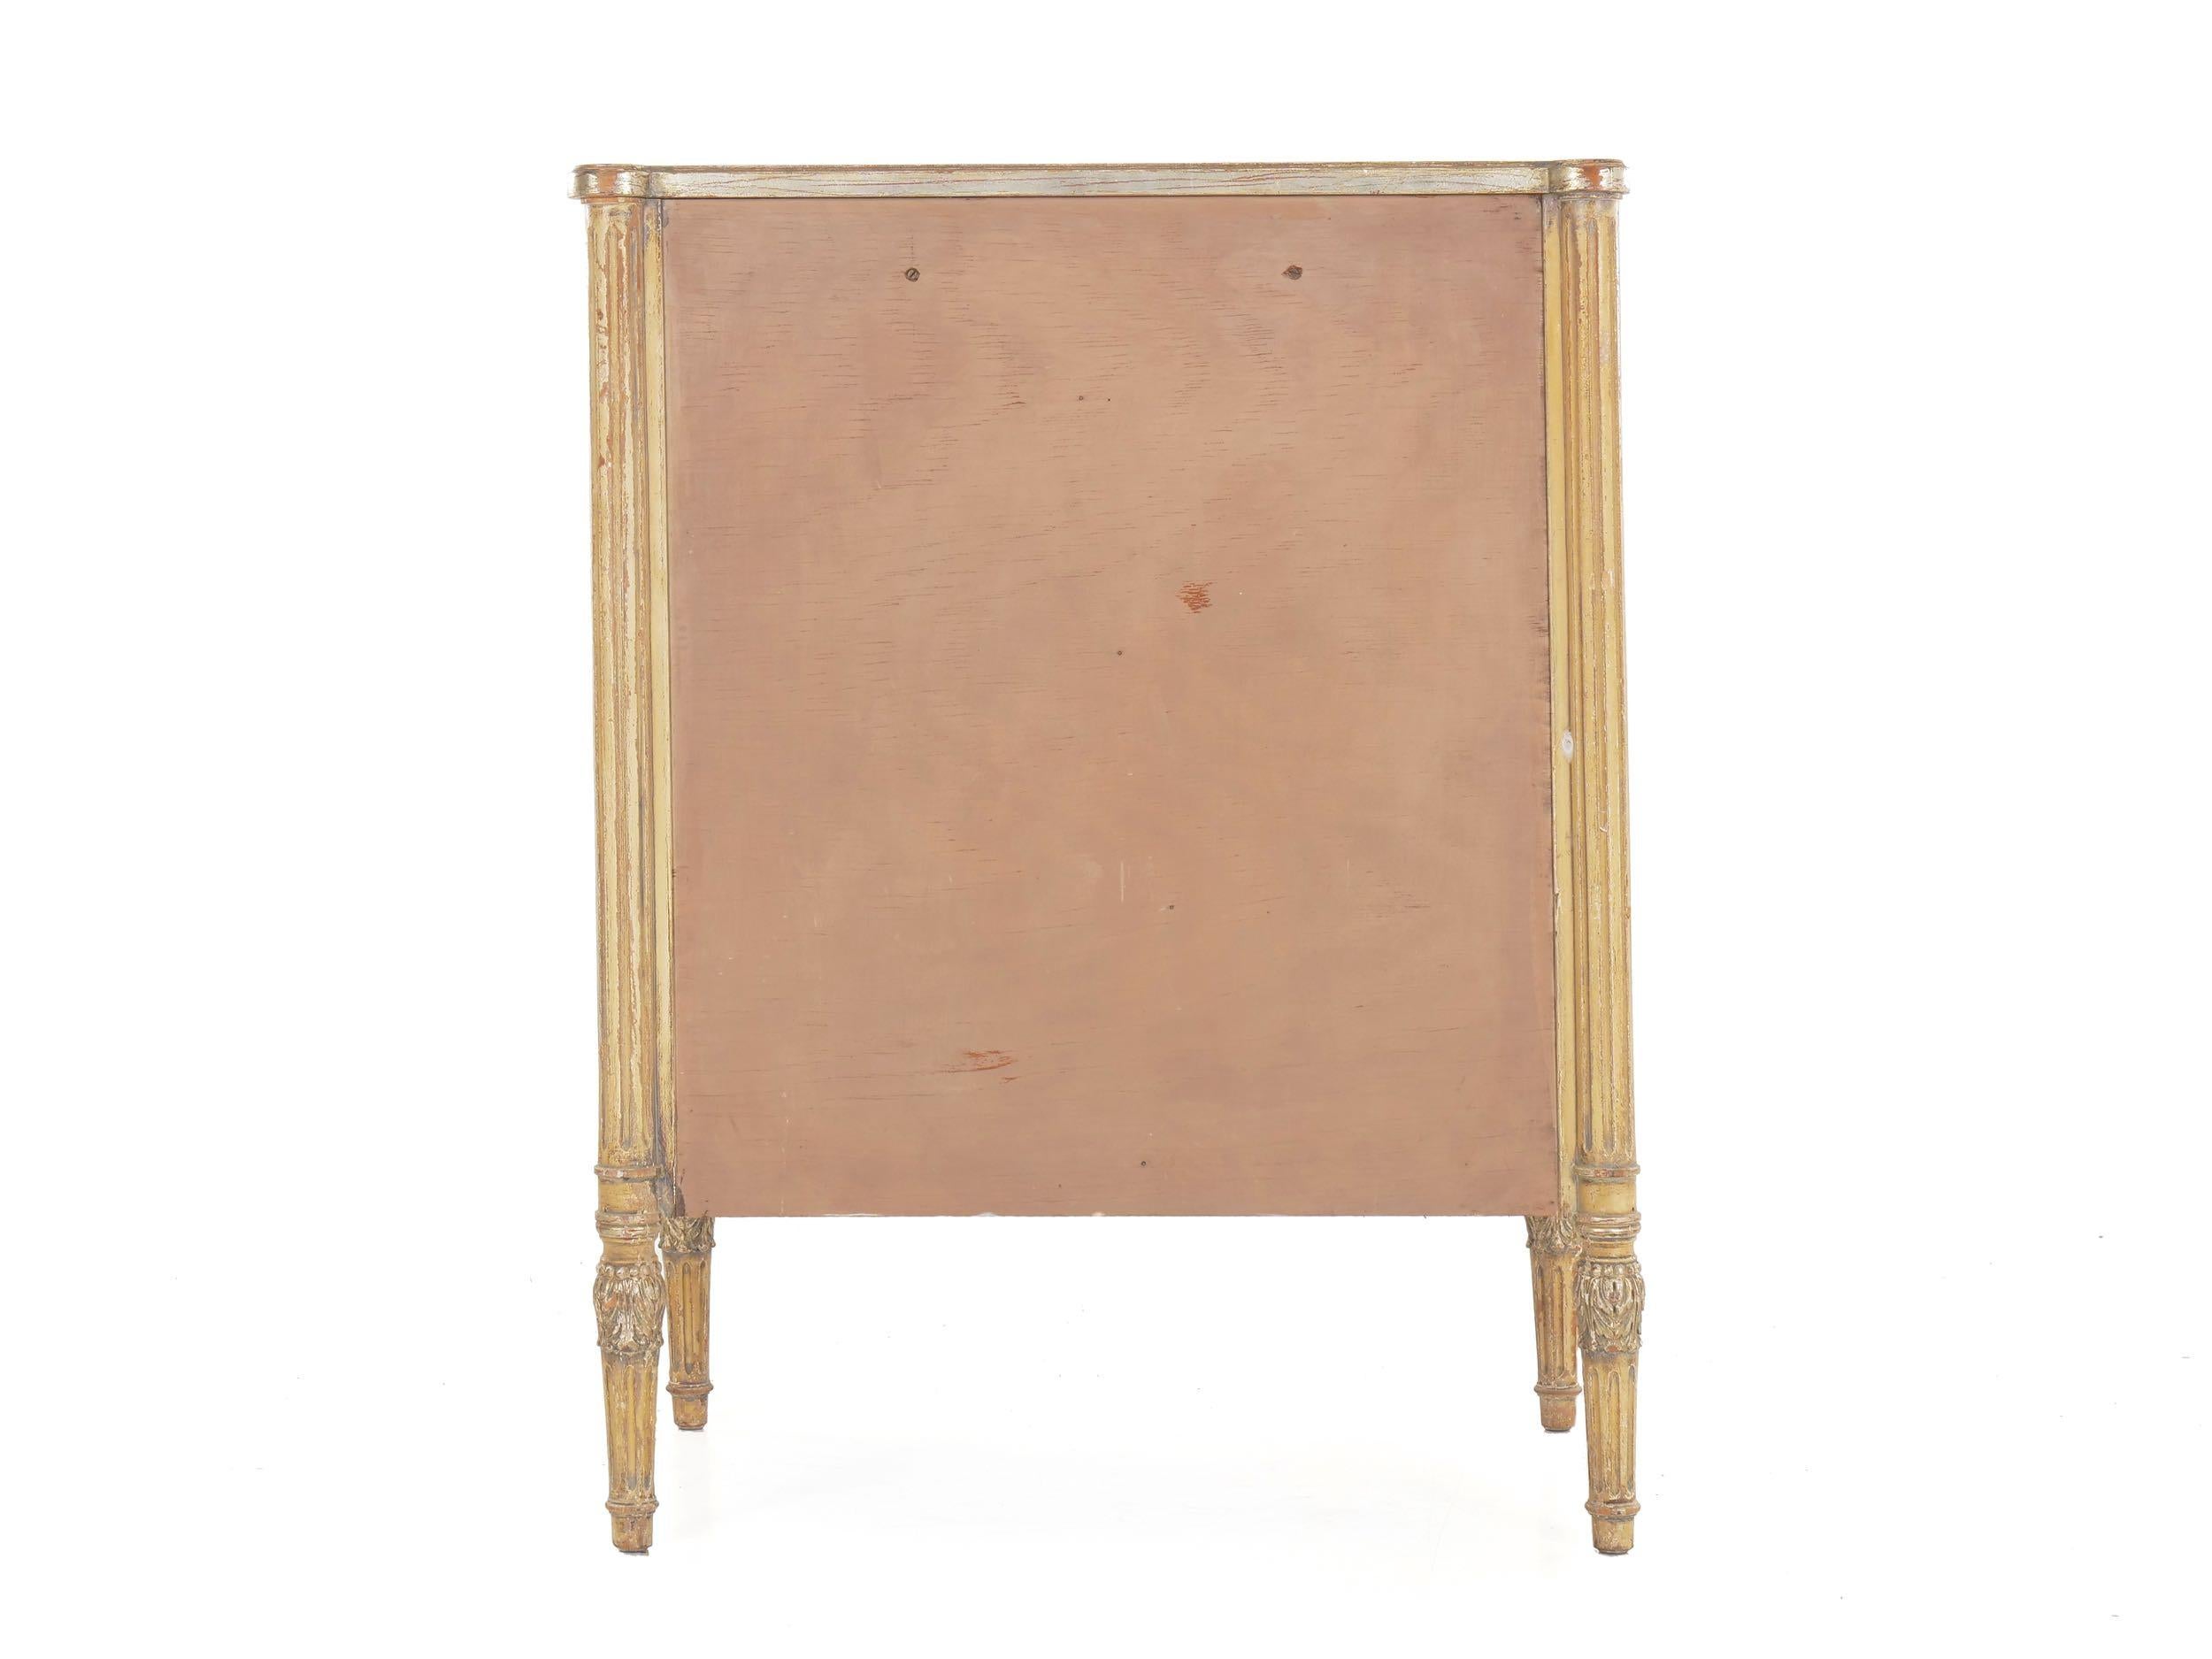 20th Century French Louis XVI Style Antique Painted Desk over Chest of Drawers circa 1940s